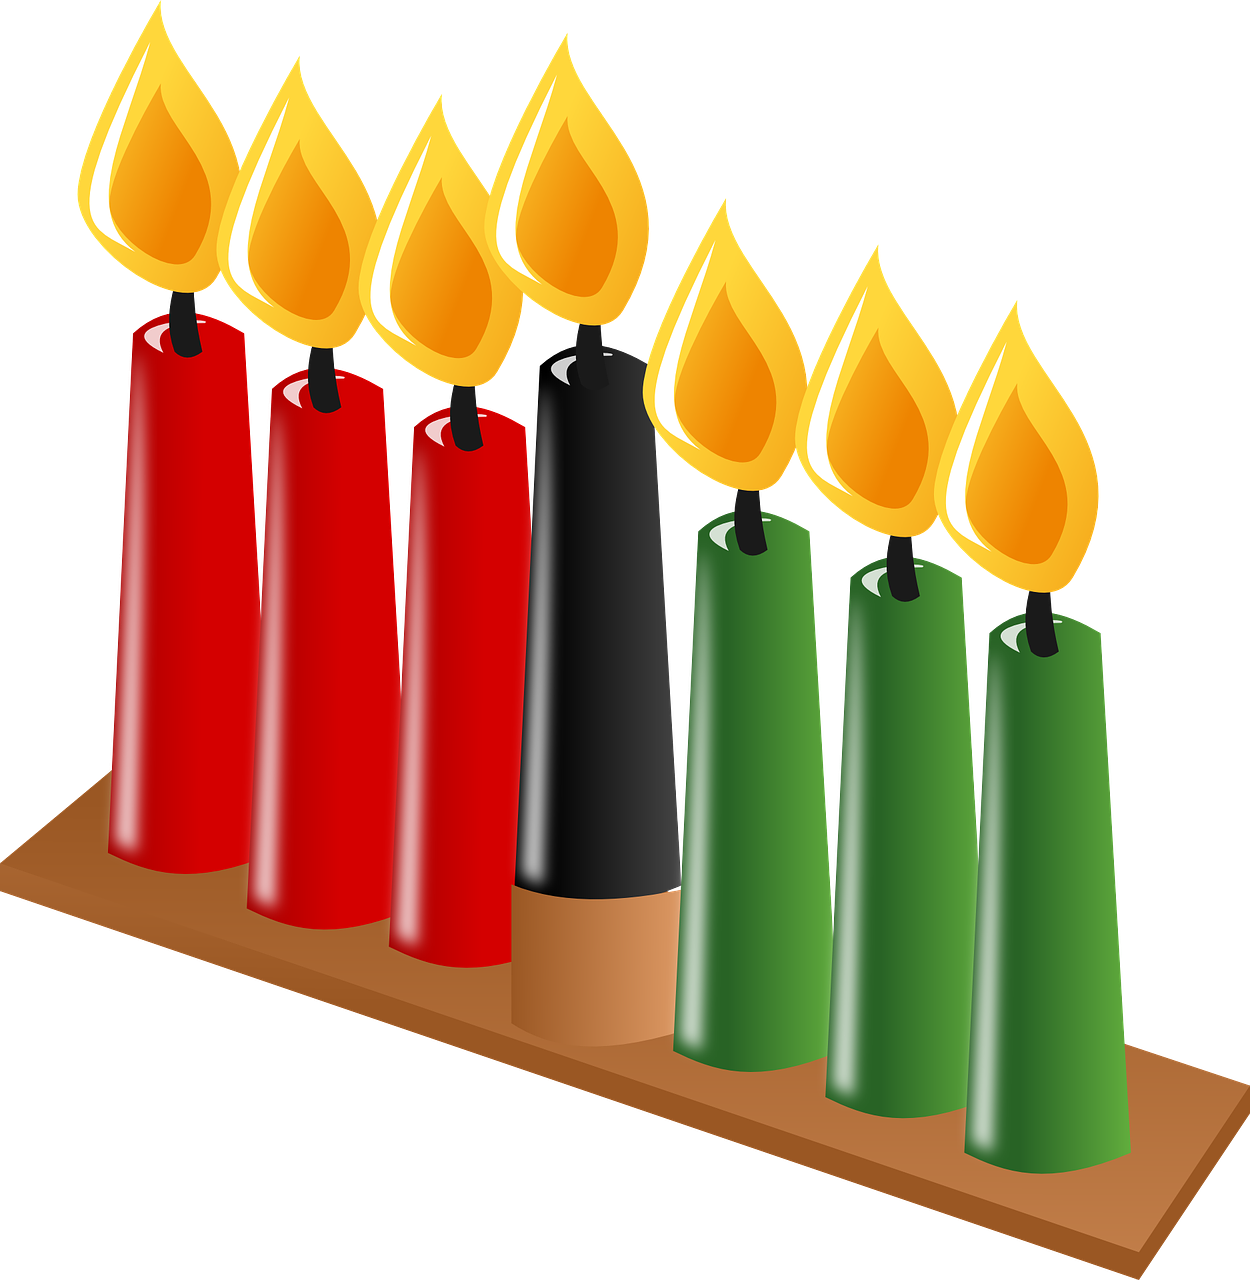 Candles Light Wax Candles Flame Png Image - Kwanzaa Candle Clip Art Transparent Png (1250x1280), Png Download